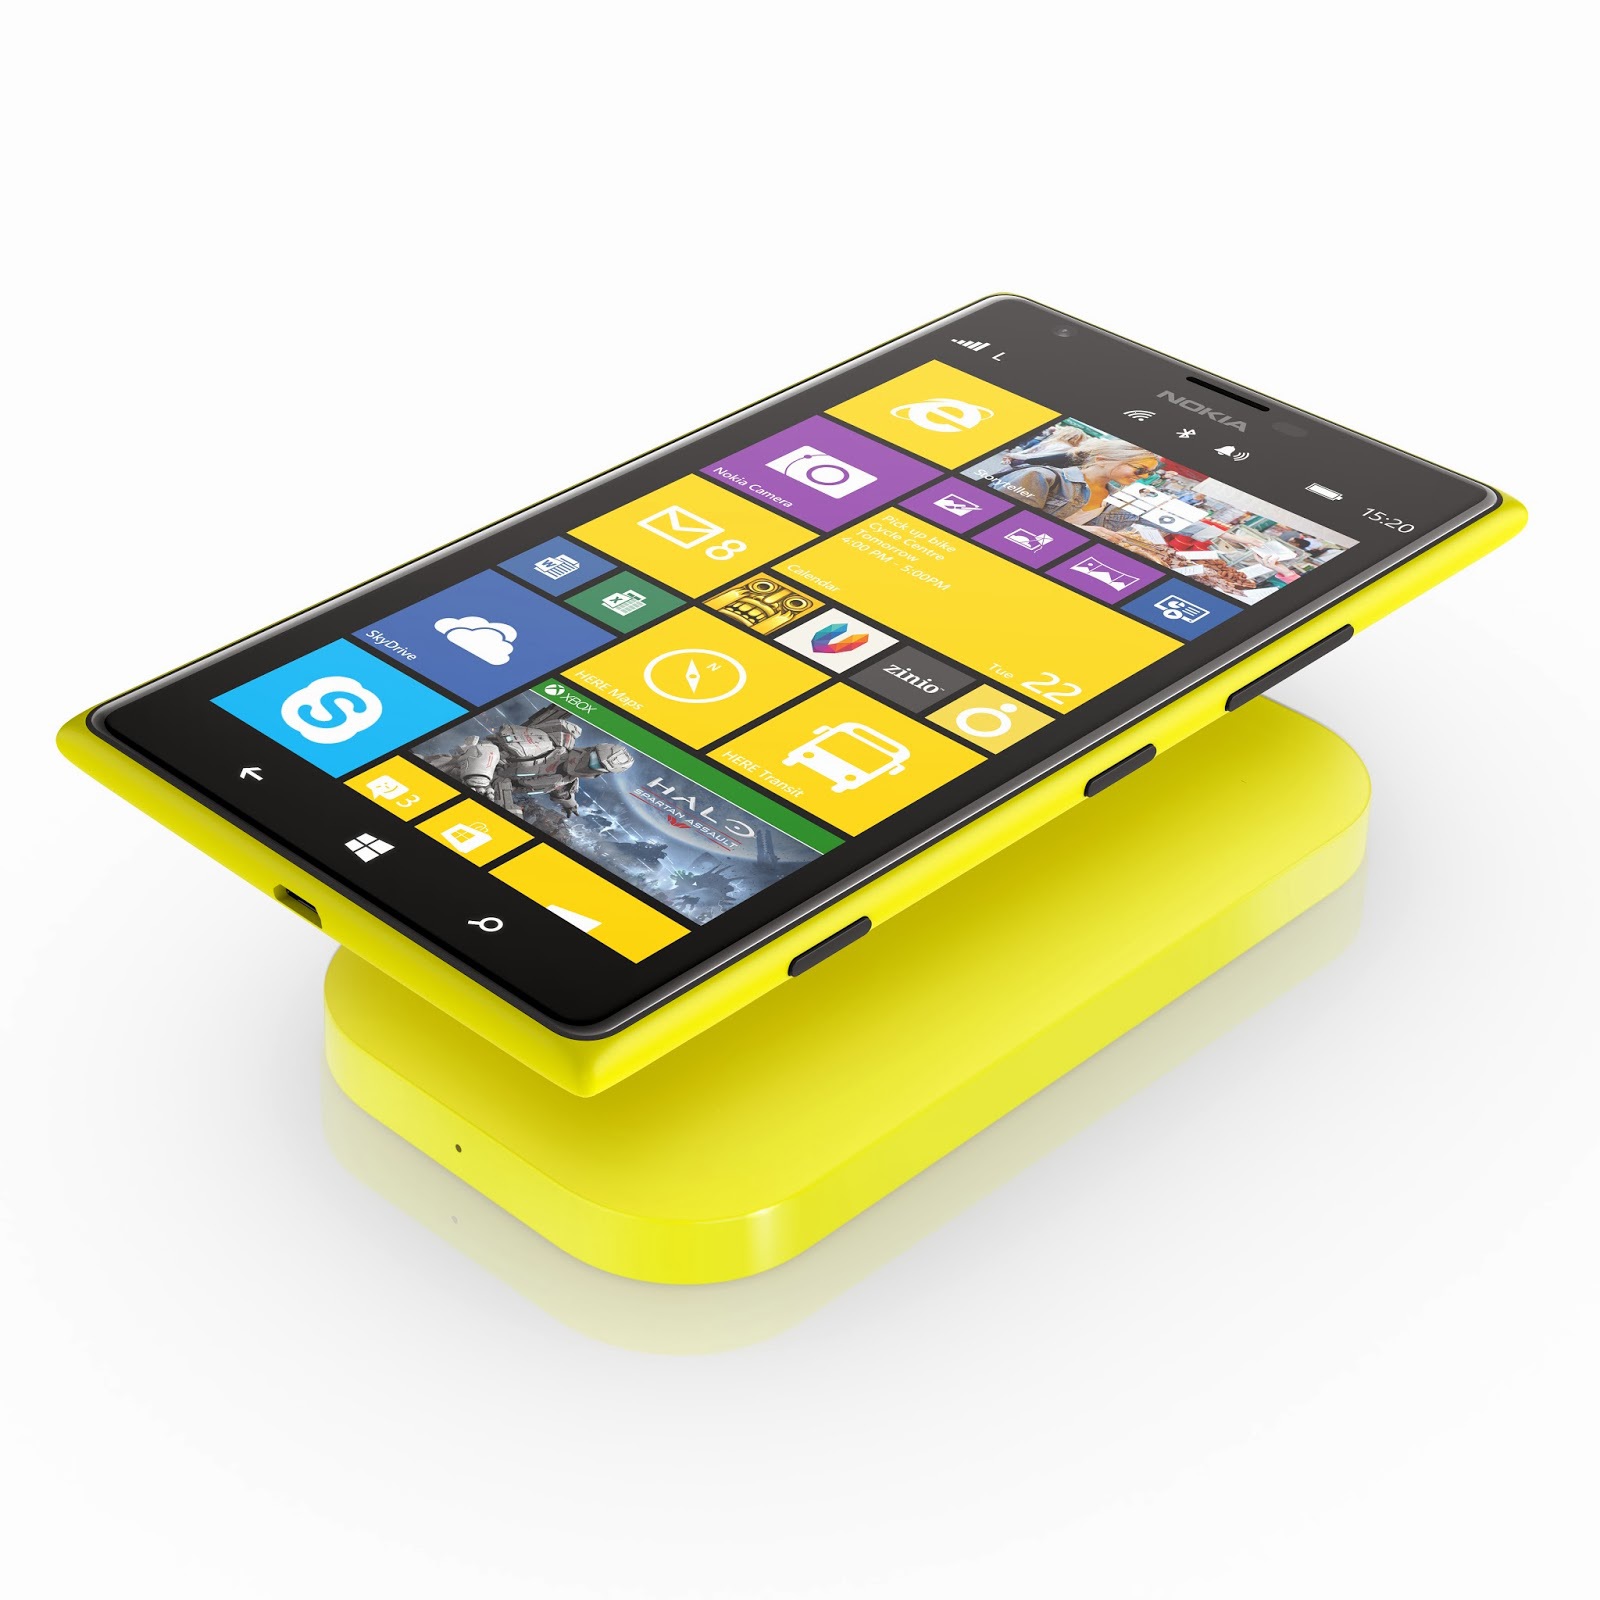 Nokia Lumia Wireless Charging Wallpaper And Image